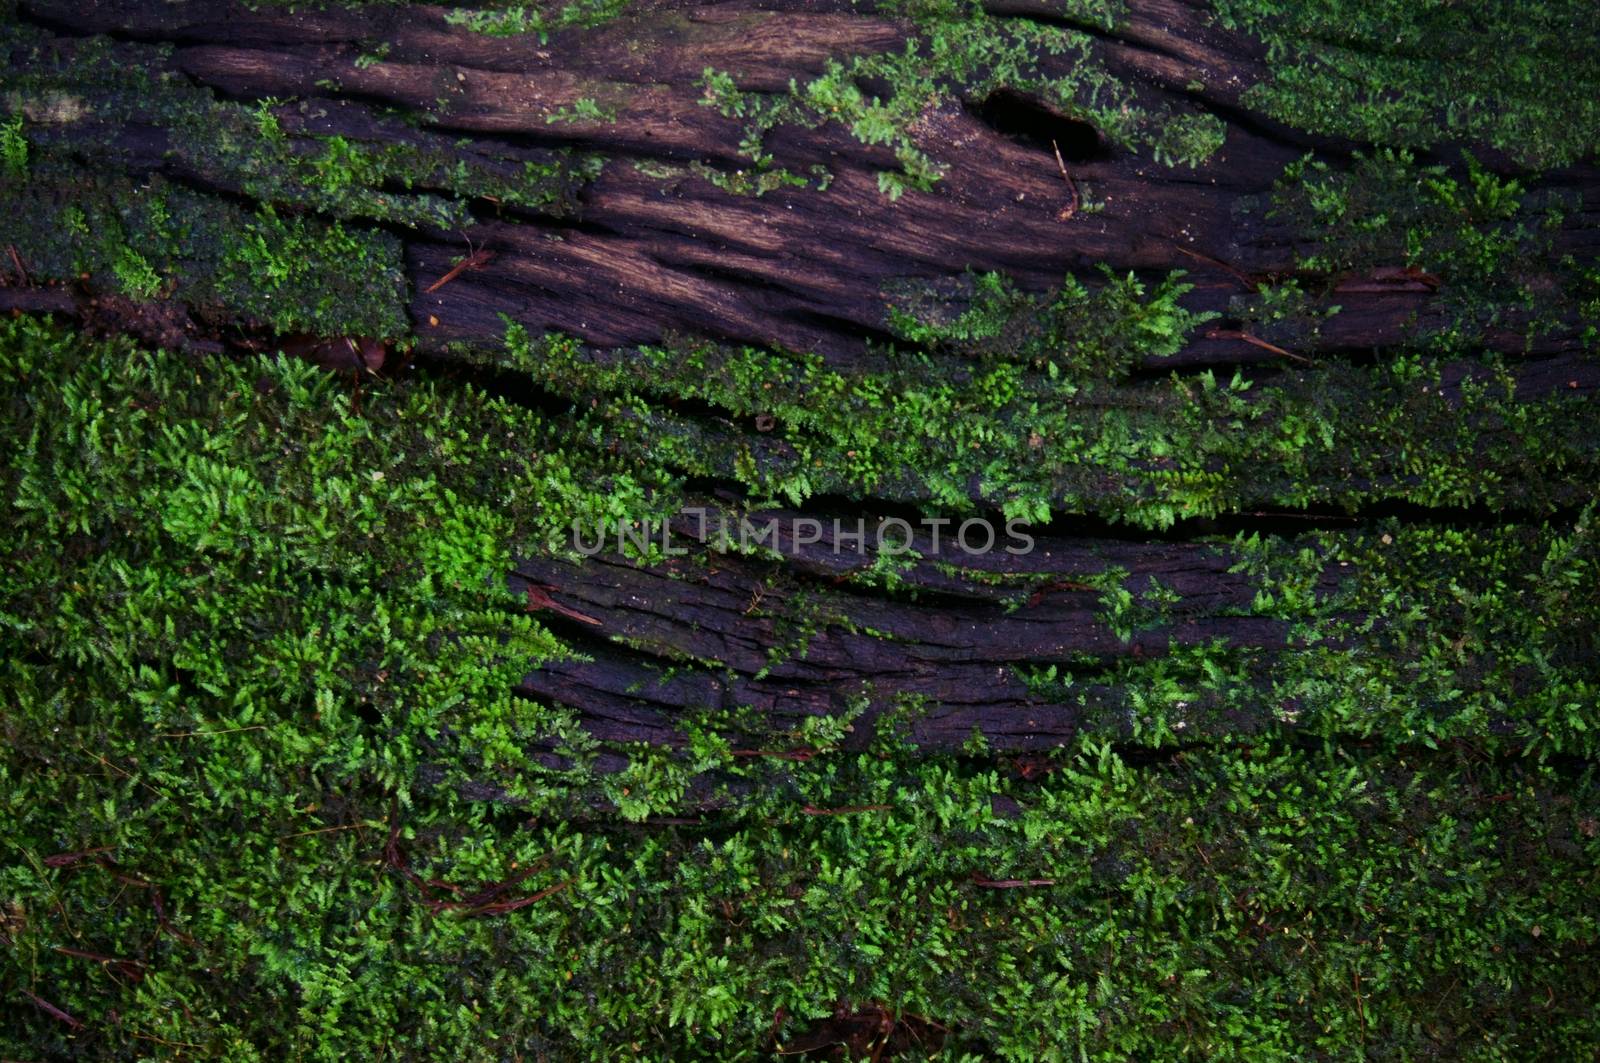 Green moss lichen background texture beautiful in nature with copy space.